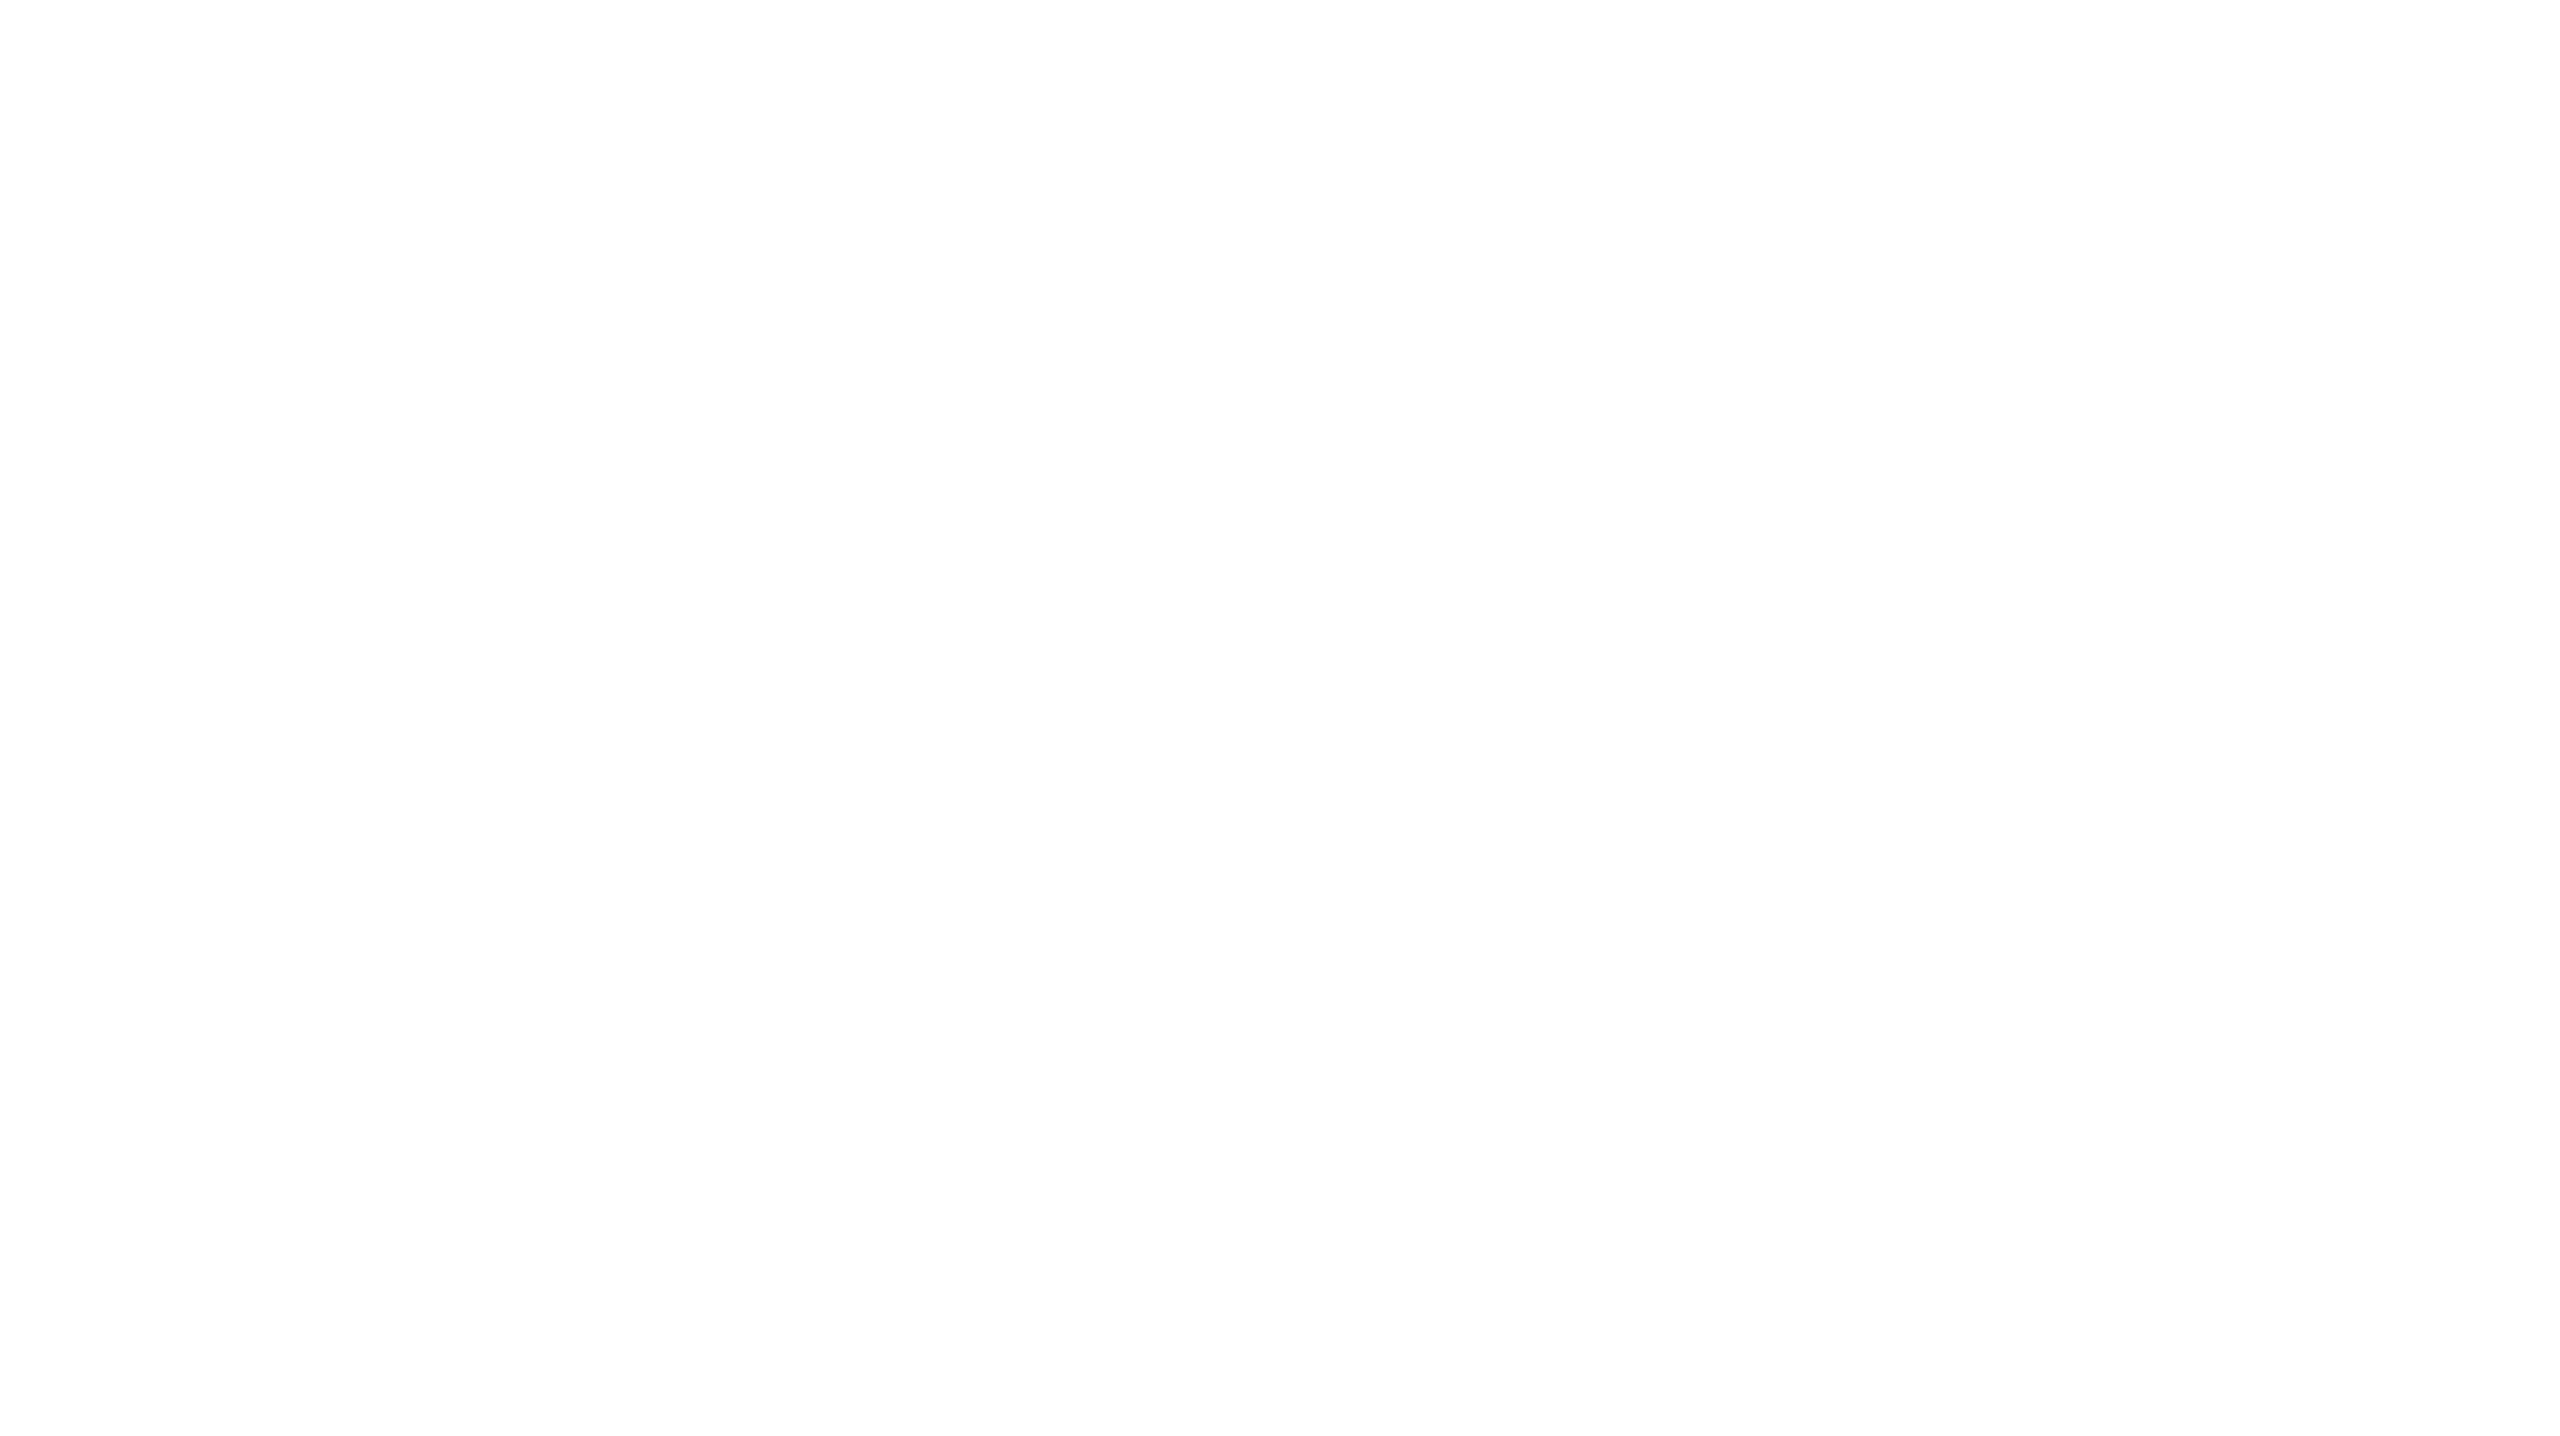 Commissions with DayFlite